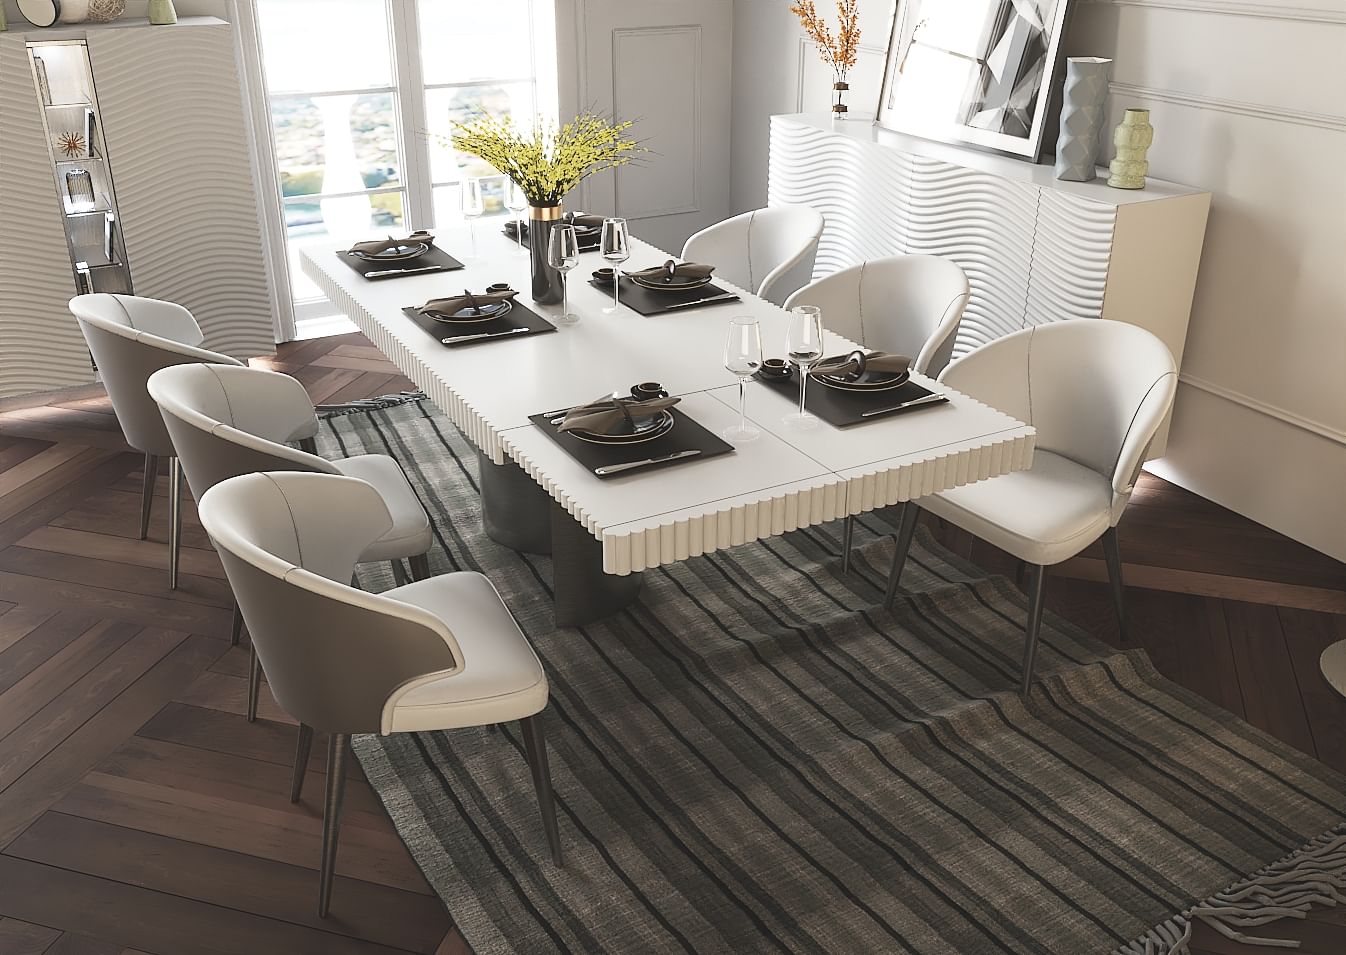 Wave Dining Room Set in White